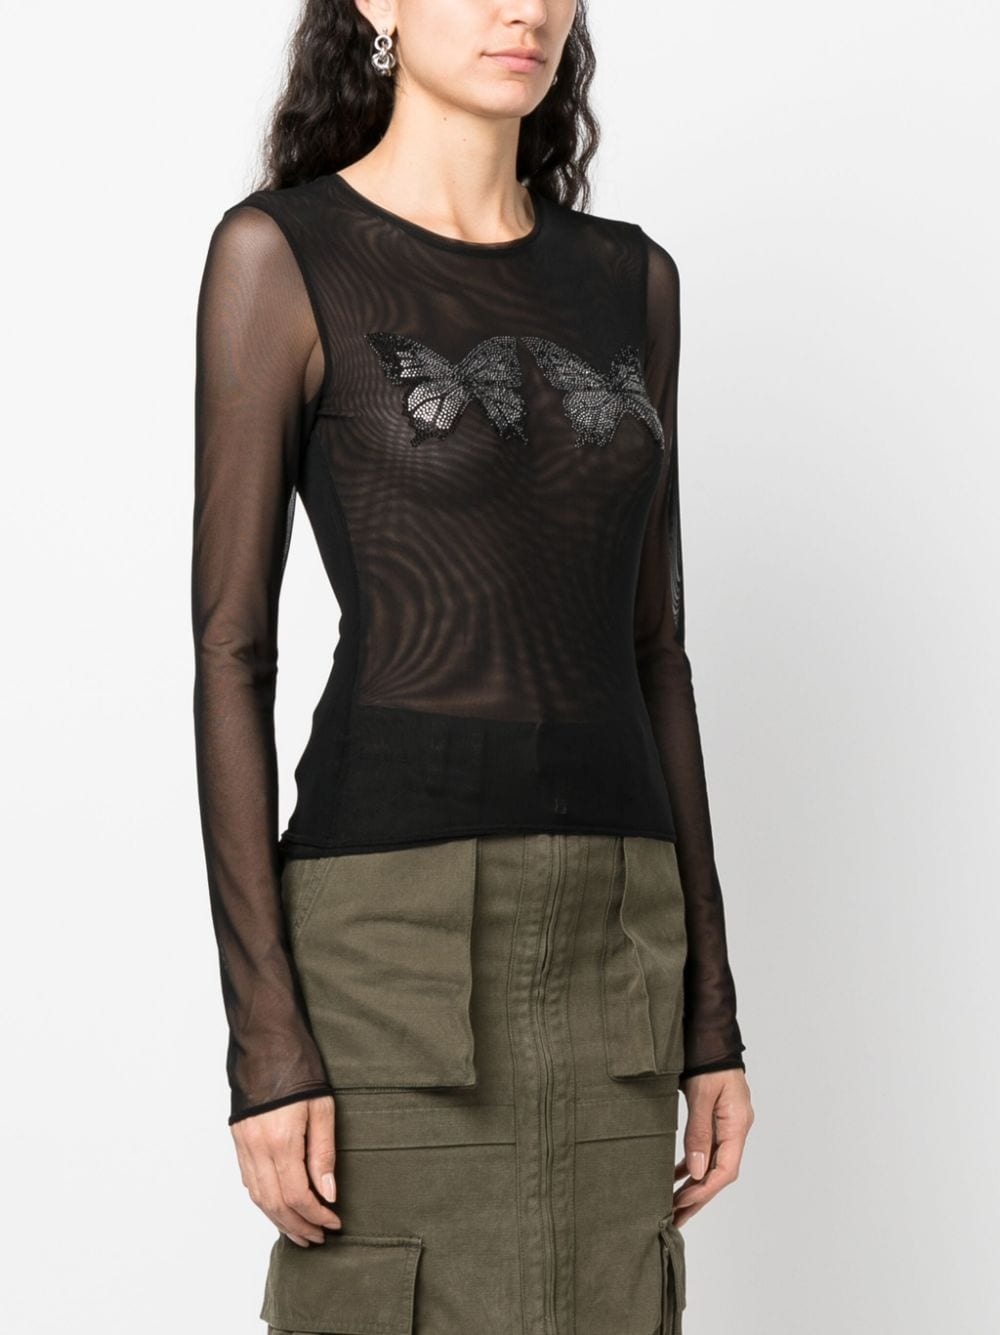 butterfly-embellished mesh top - 3